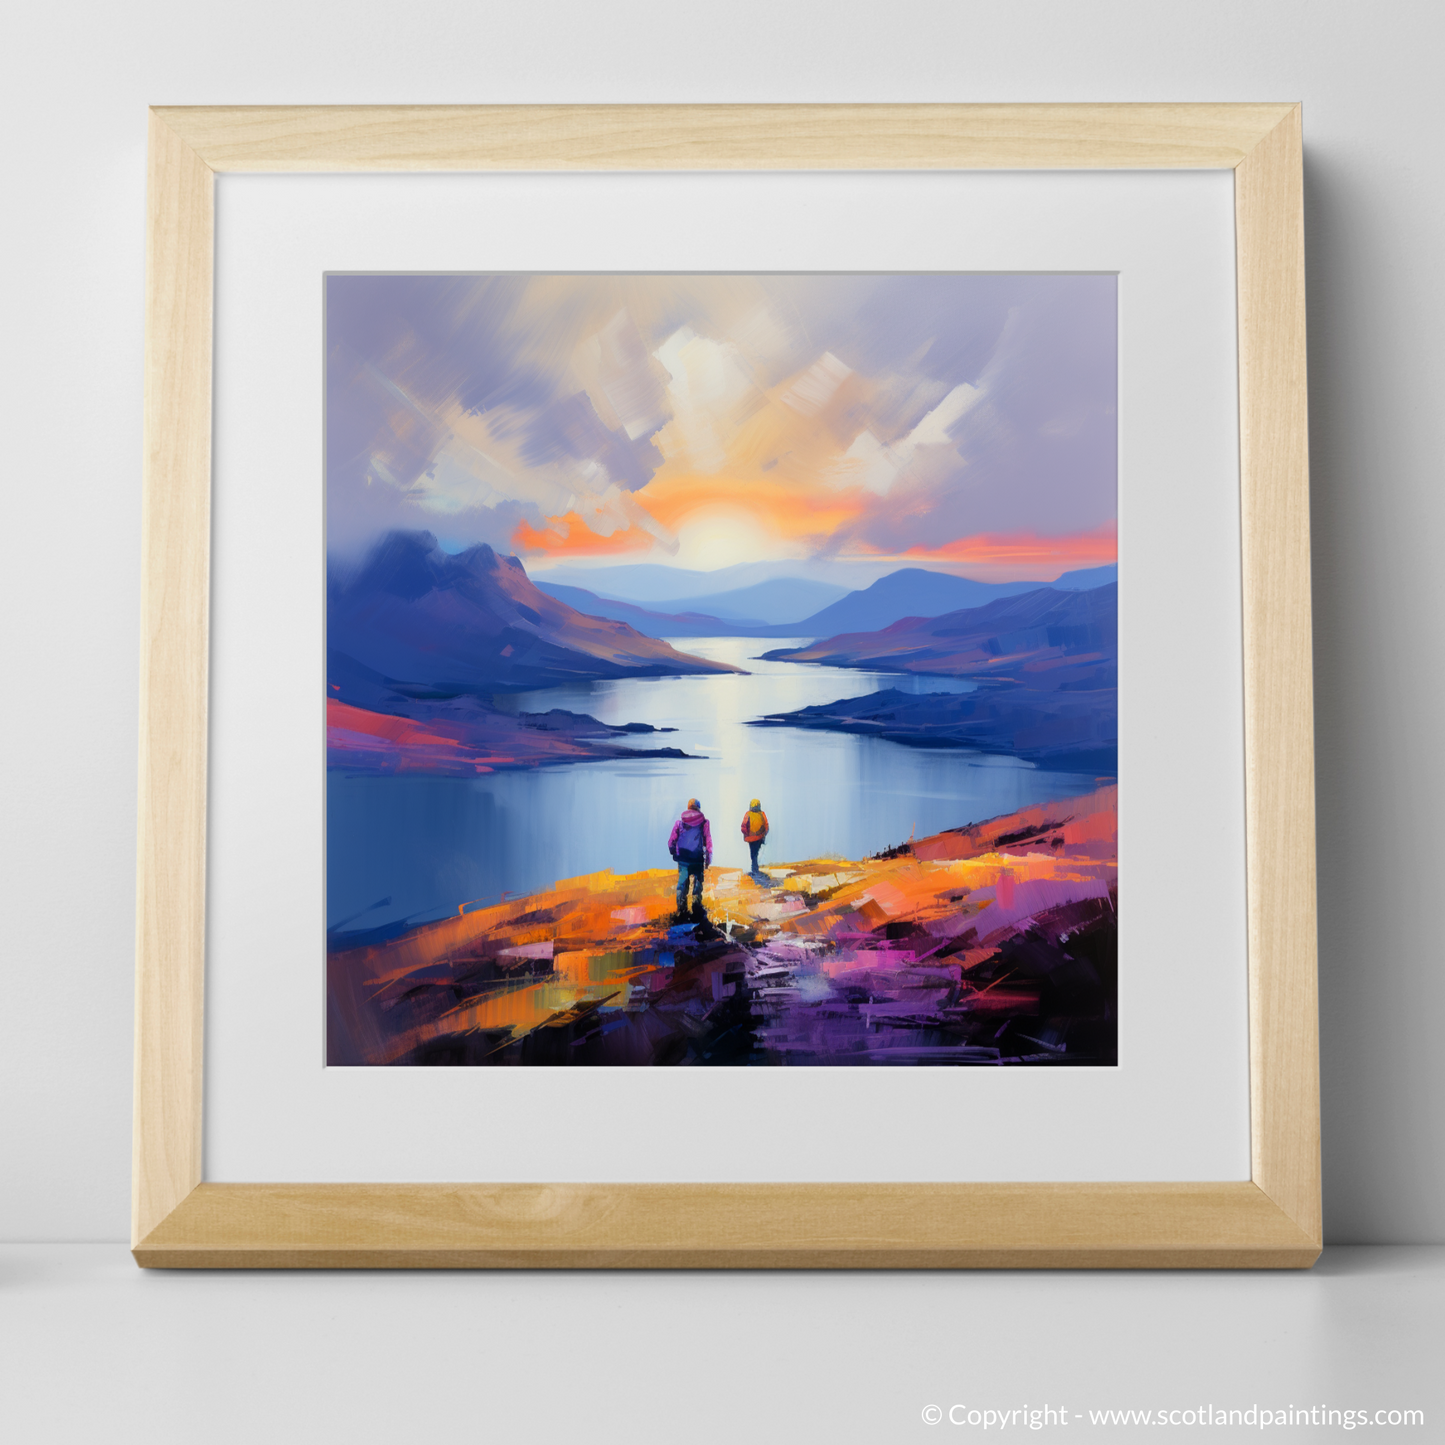 Art Print of Two hikers looking out on Loch Lomond with a natural frame